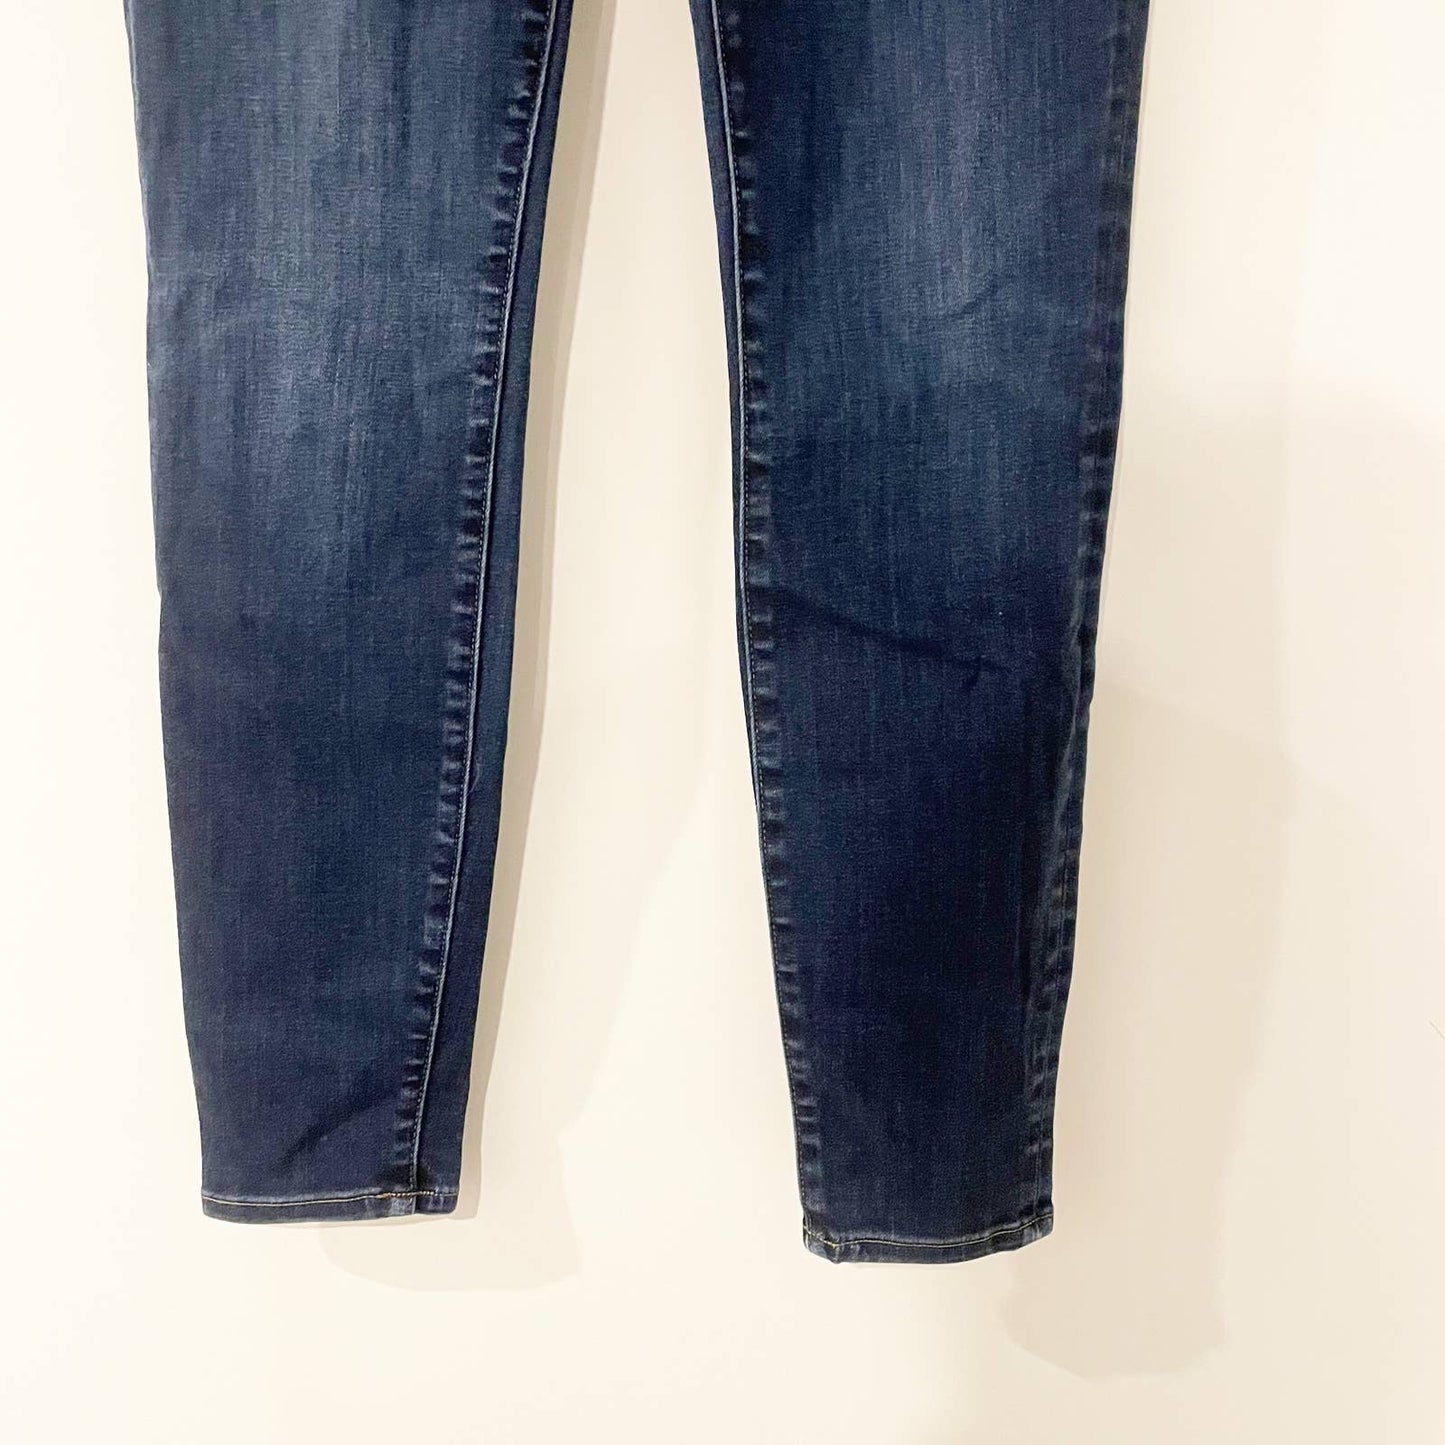 Madewell 9 Inch High Rise Skinny Jeans in Larkspur Wash Blue 28